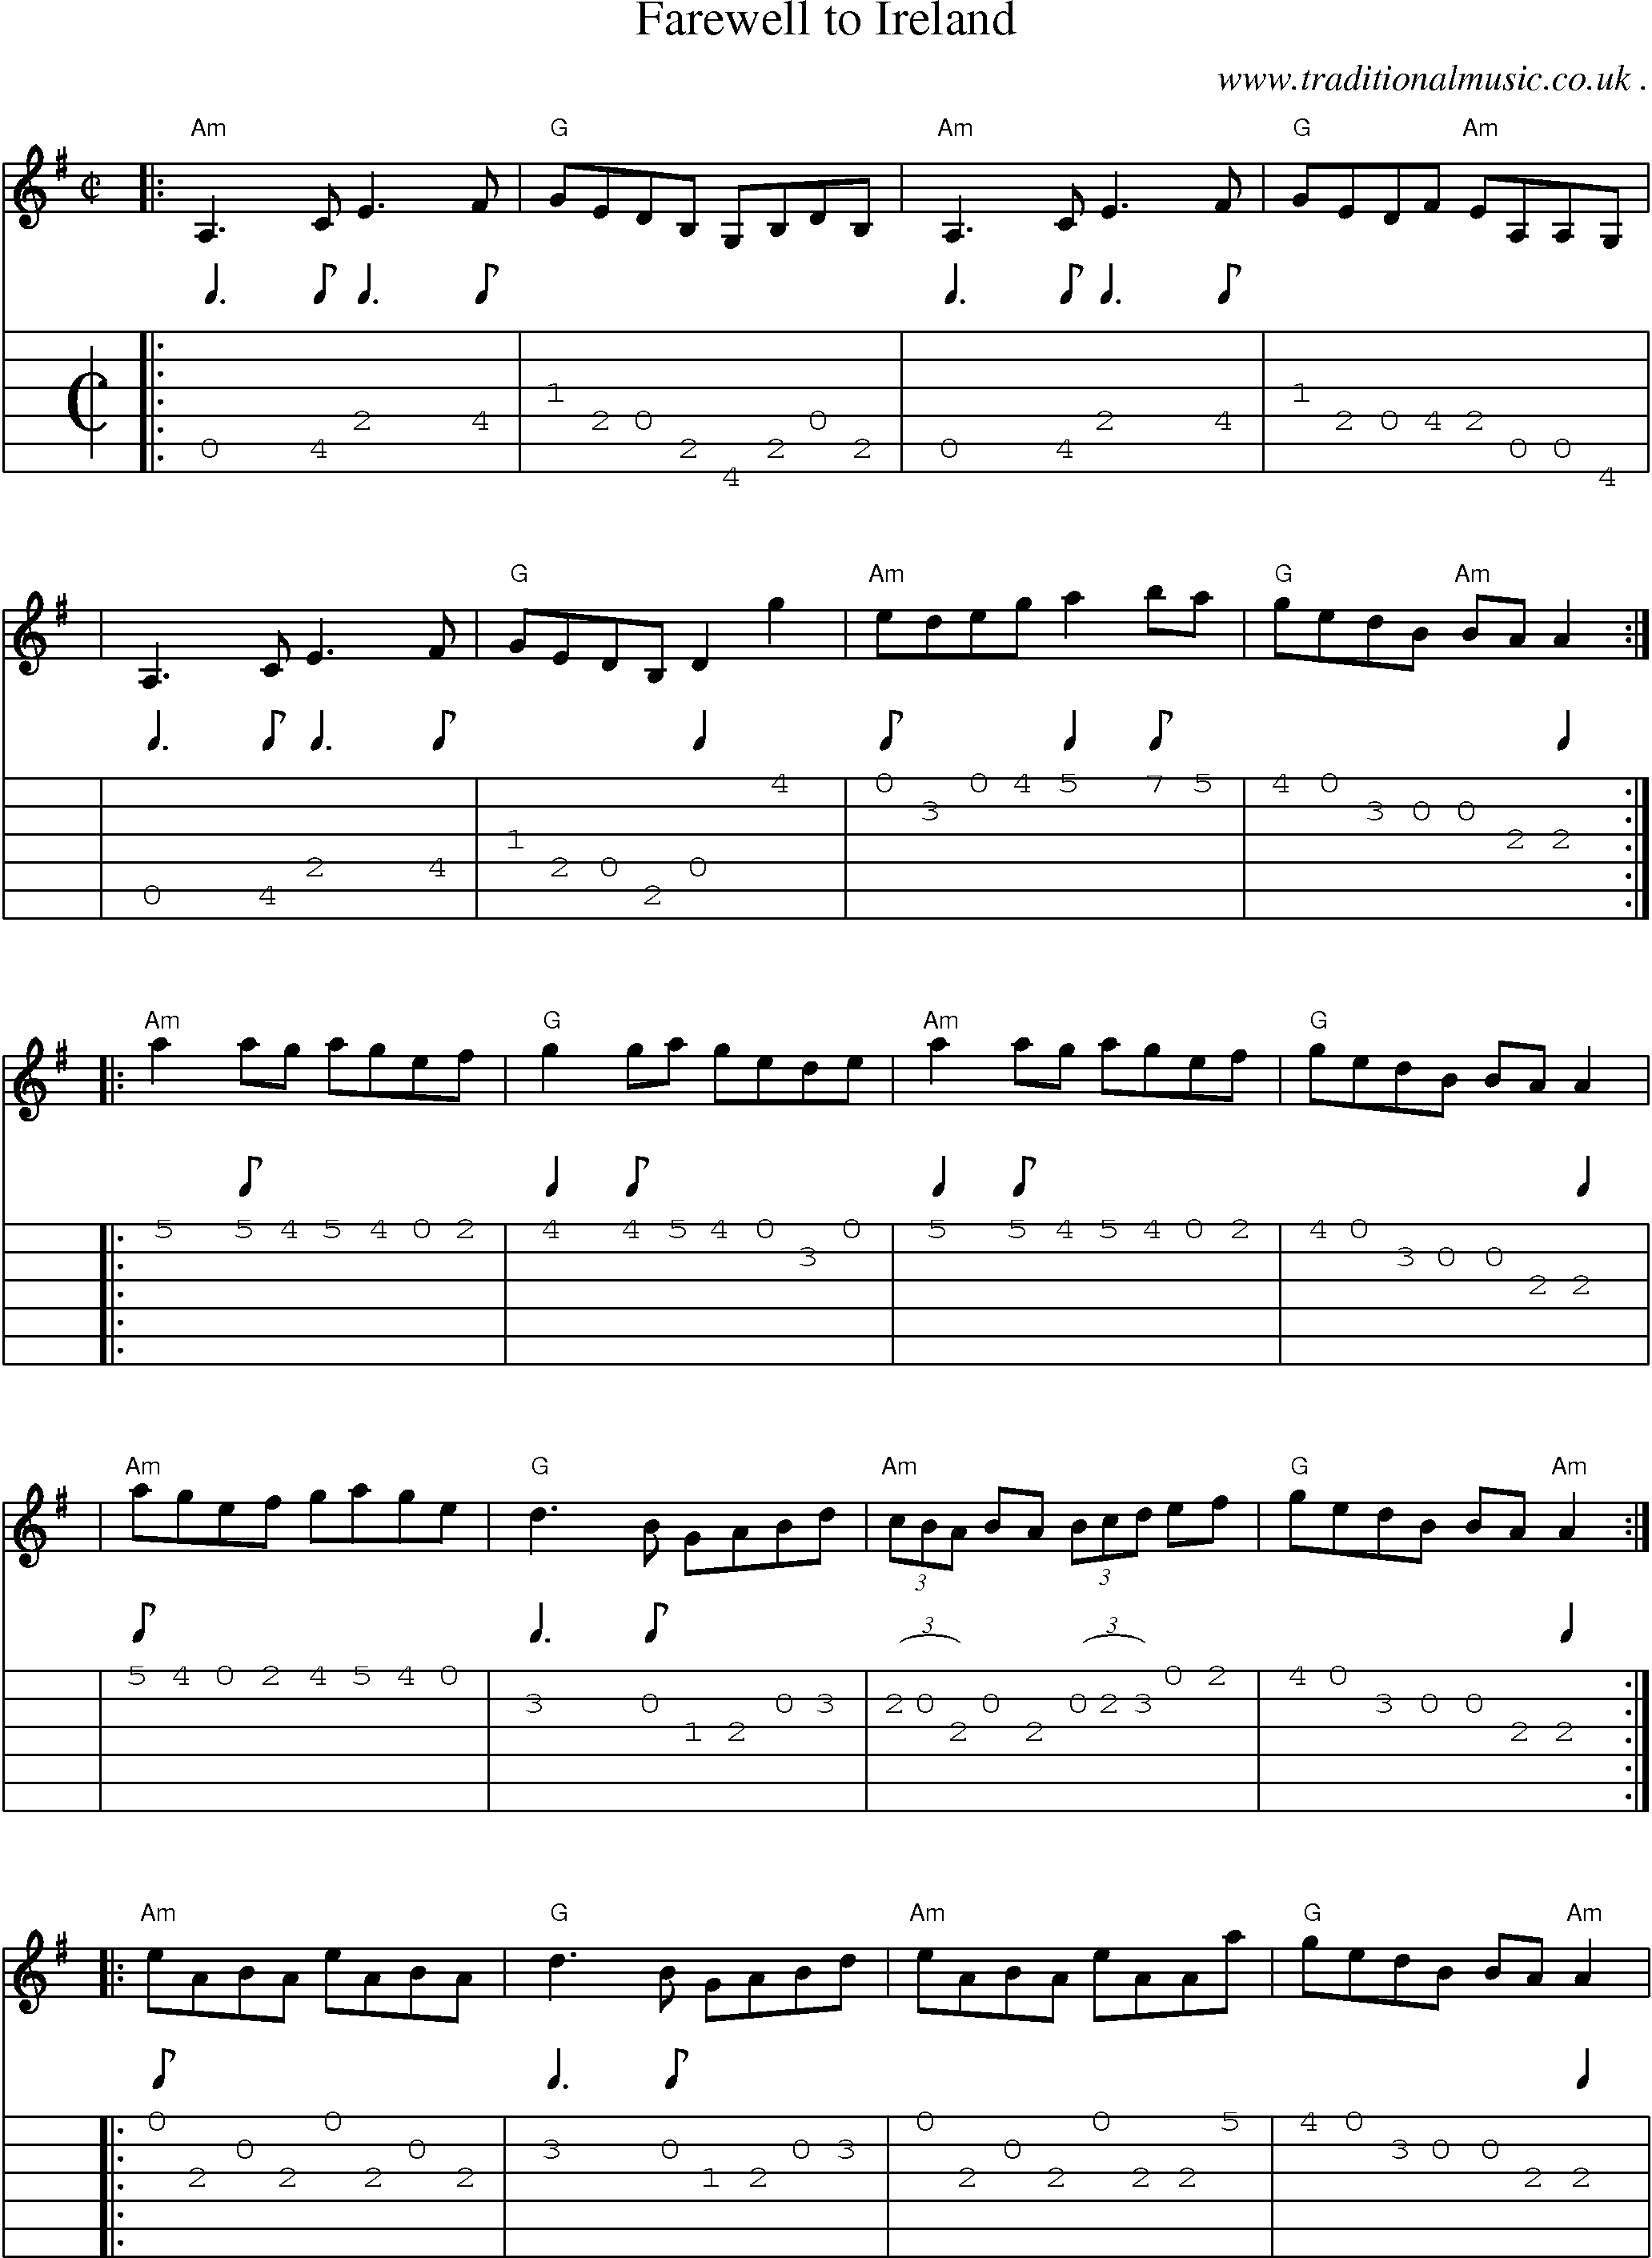 Sheet-music  score, Chords and Guitar Tabs for Farewell To Ireland